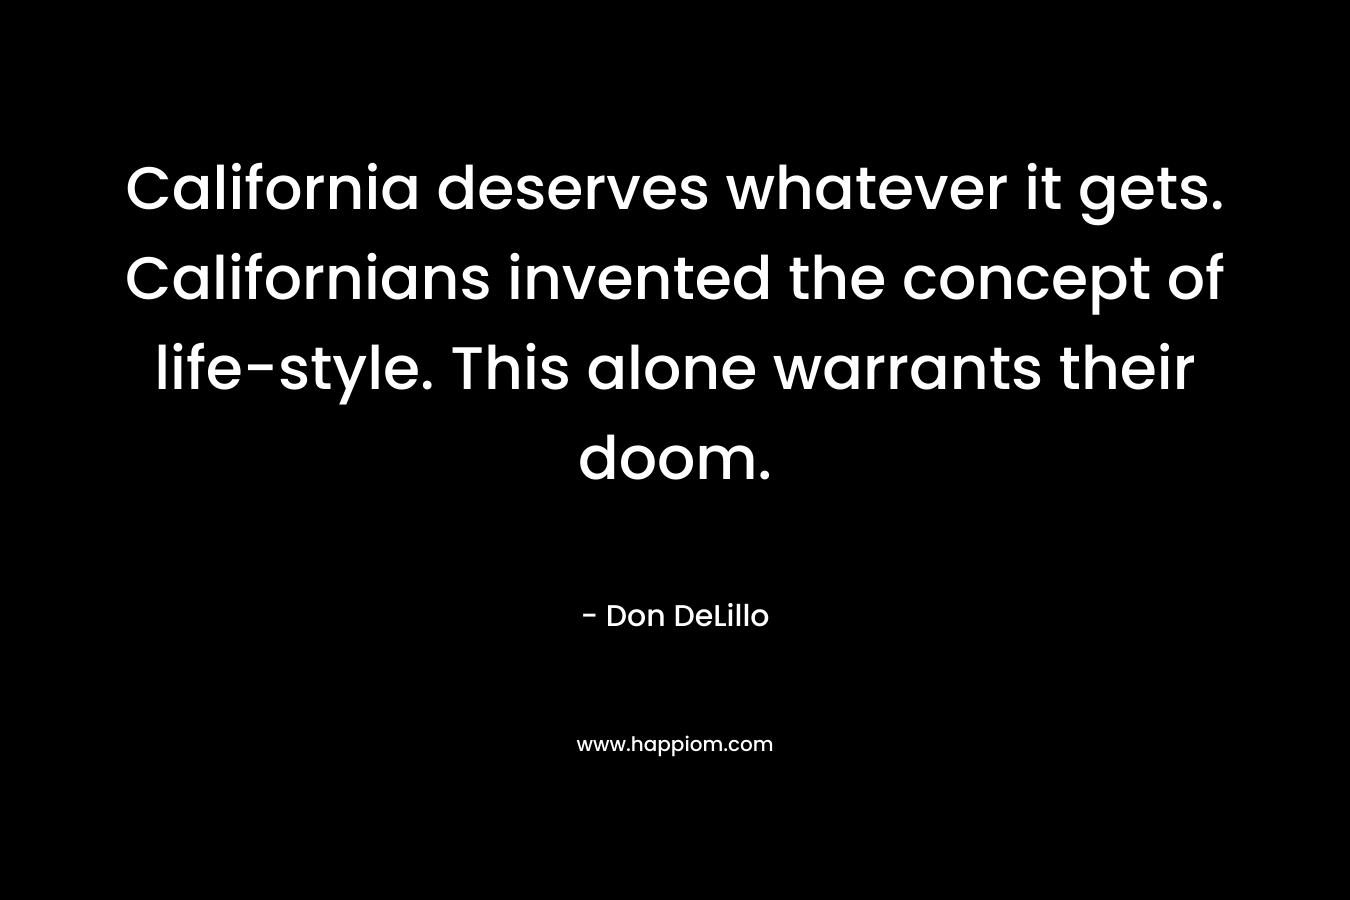 California deserves whatever it gets. Californians invented the concept of life-style. This alone warrants their doom. – Don DeLillo